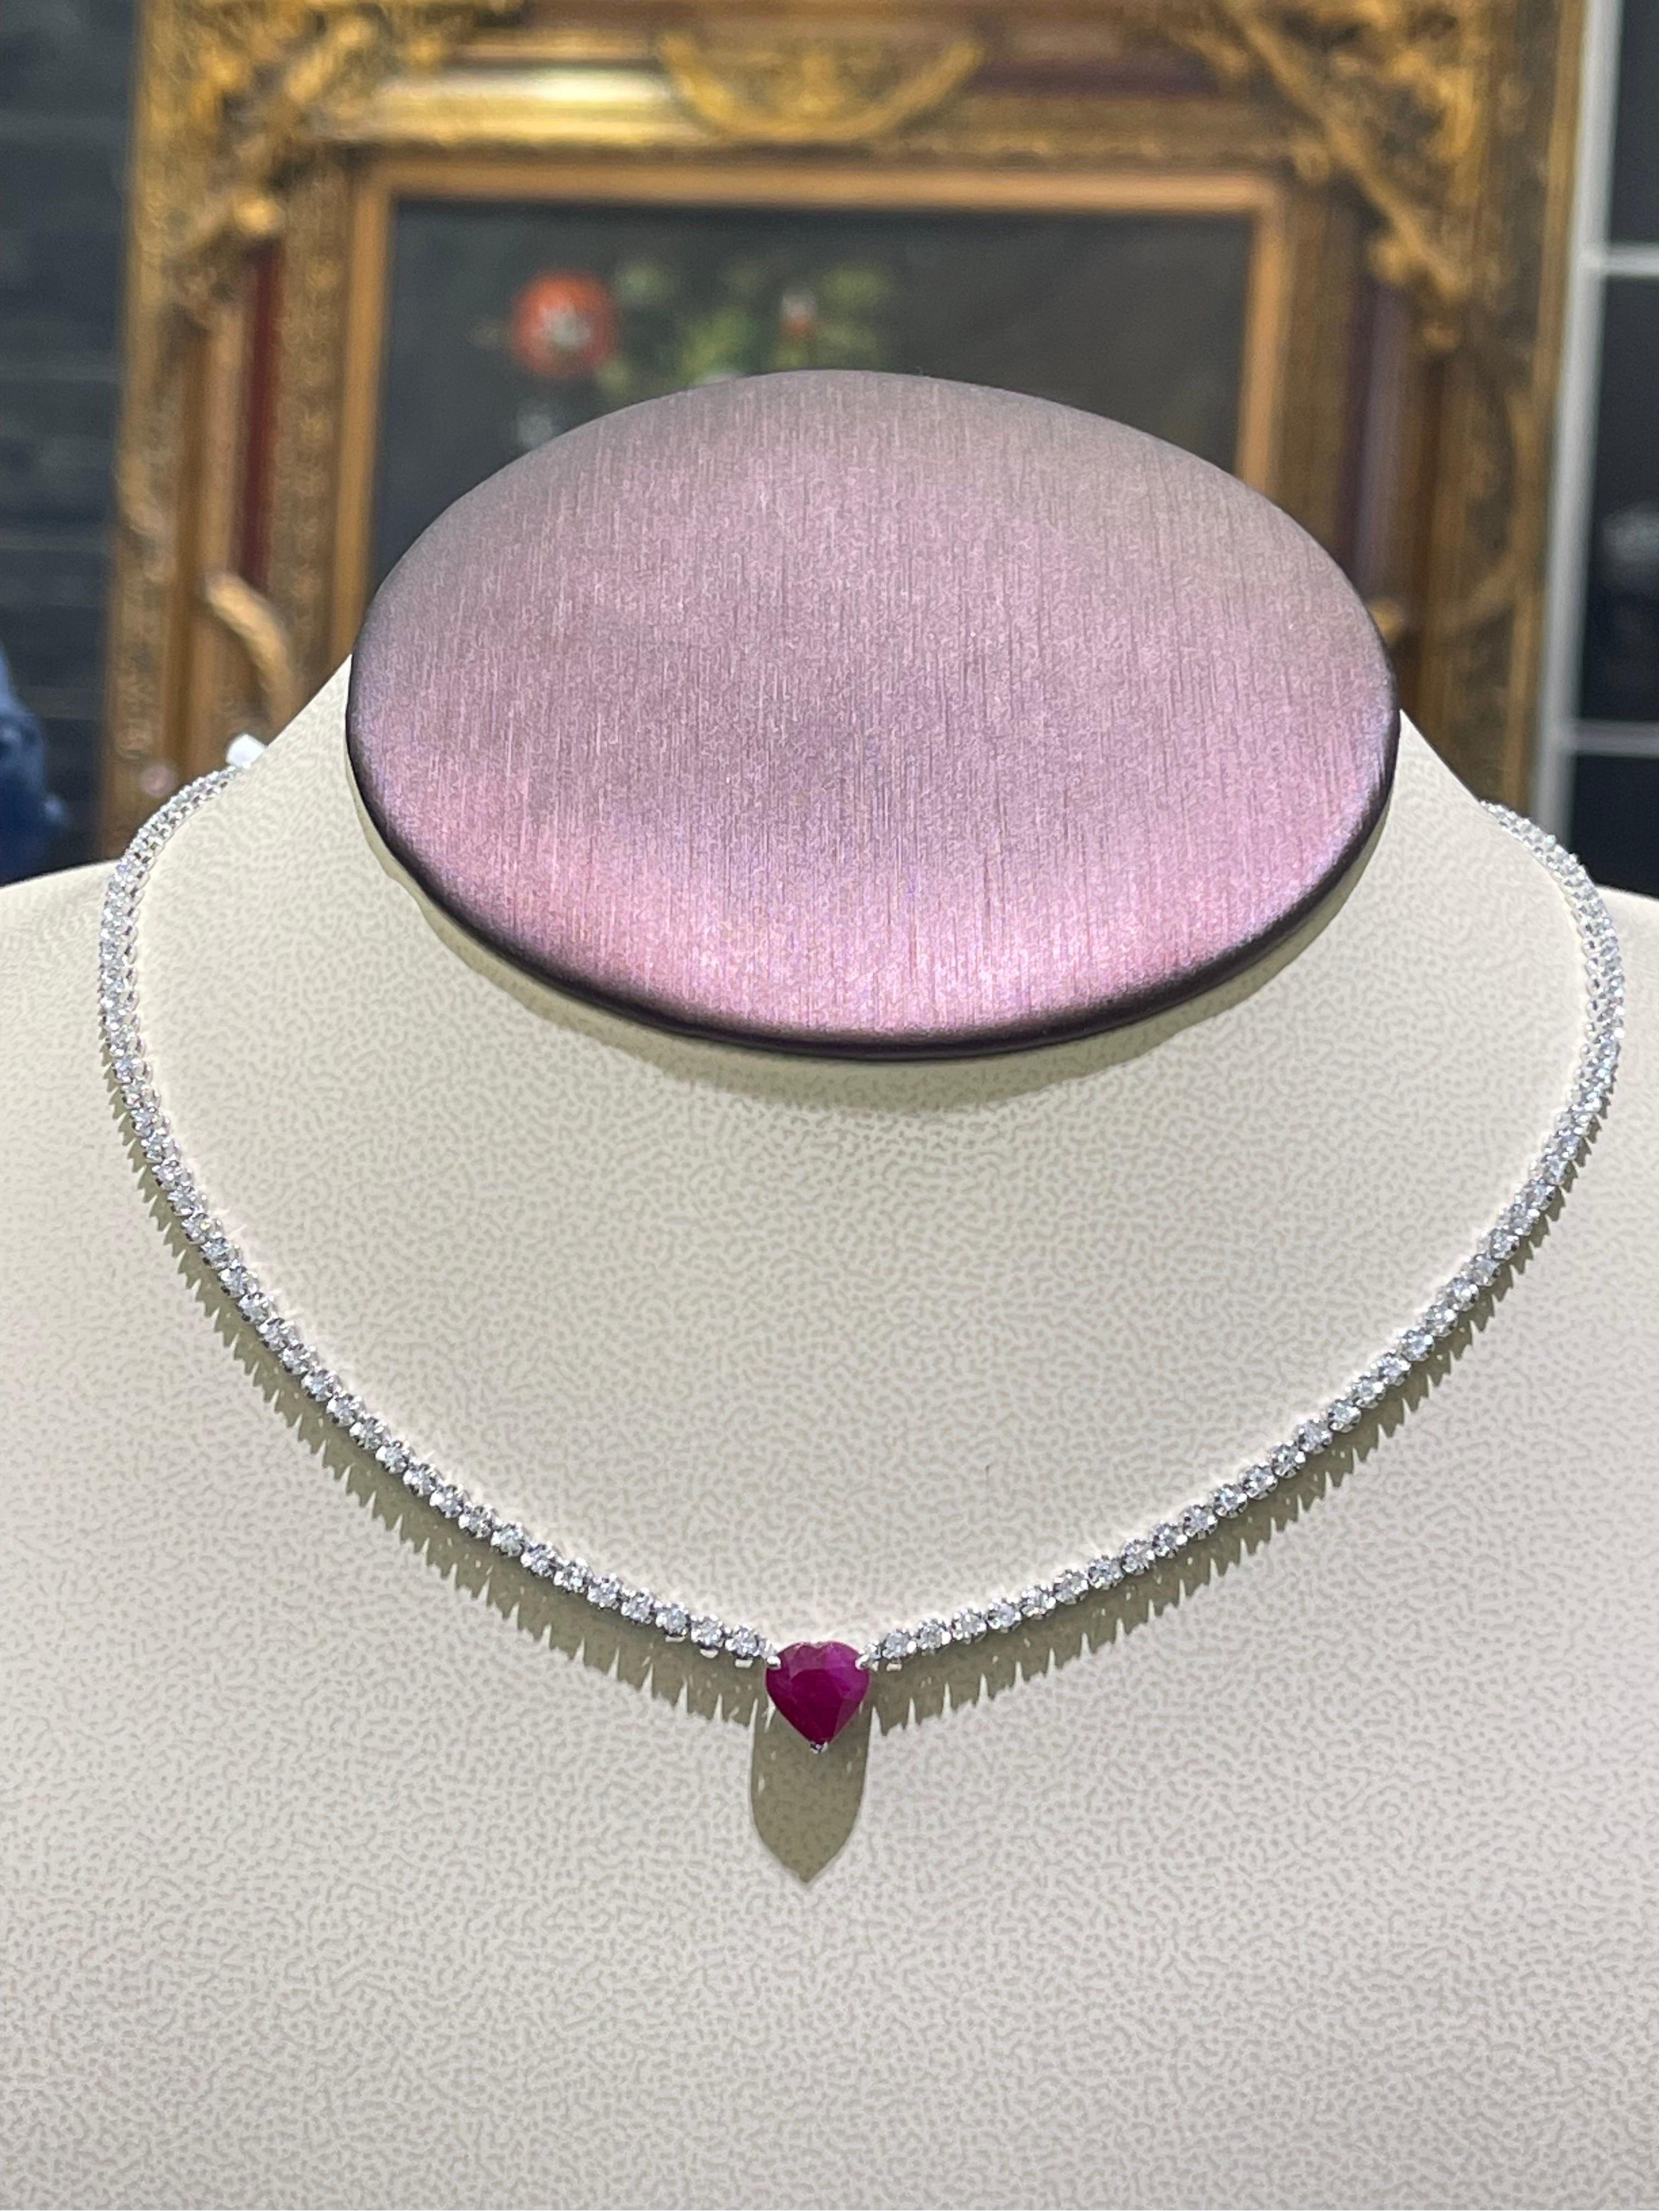 Beautiful Ruby And Diamond Necklace In 18k White Gold ,

- 1.95 diamonds total carat weight,

- 2.30 carats in heart shaped Ruby,

- necklace length is 16”